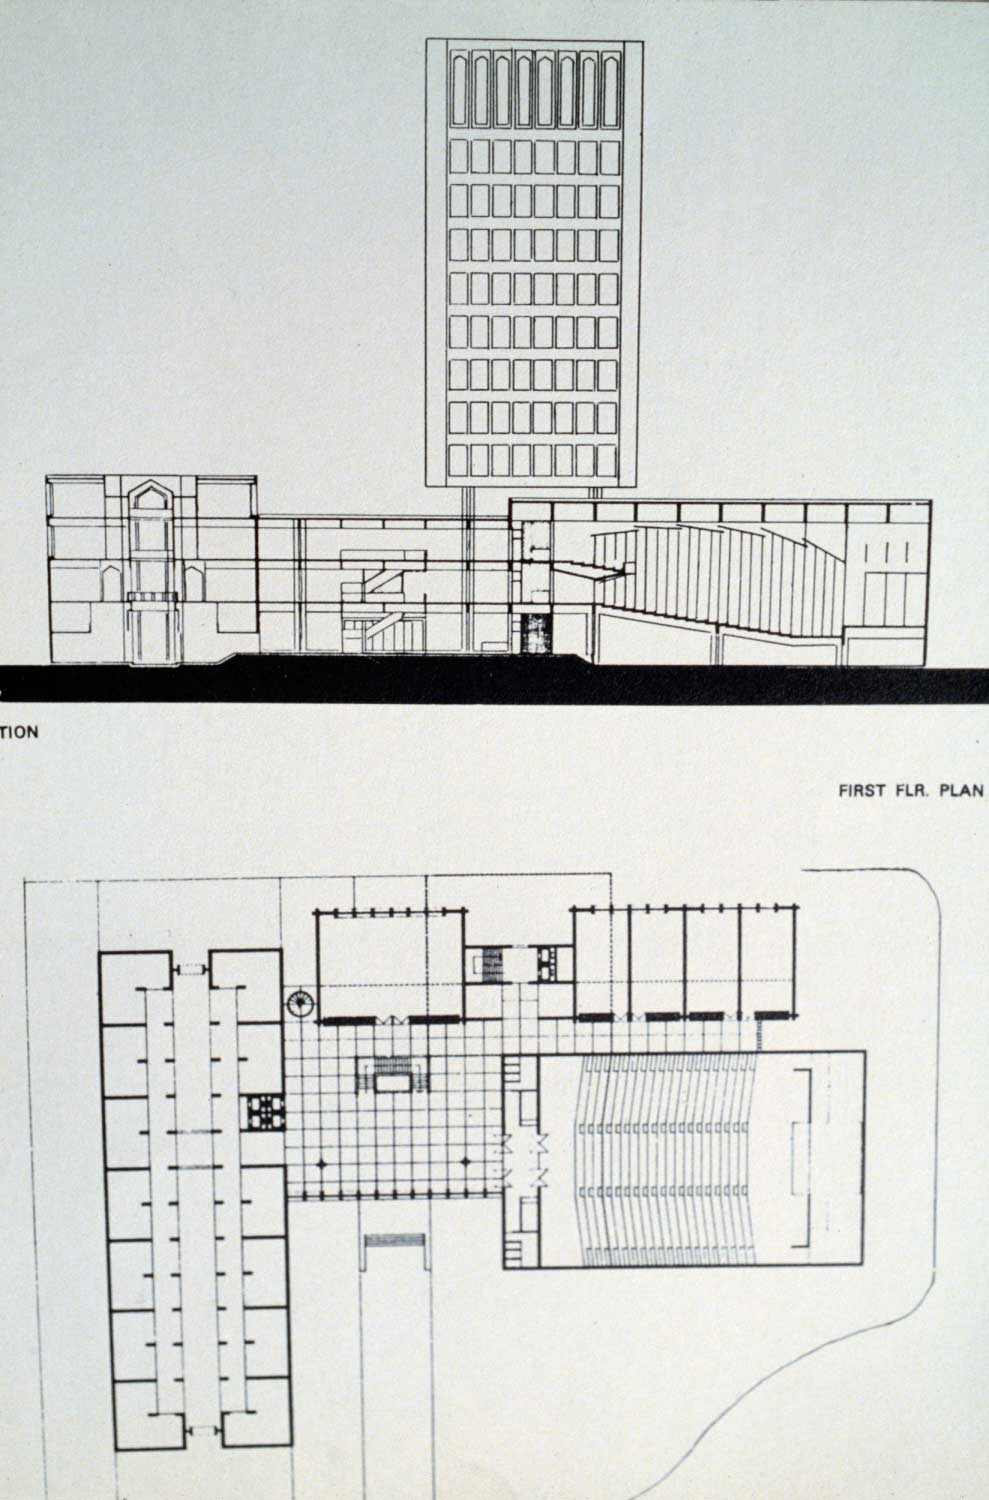 Islamic Bank - Elevation and first floor plan [drawings of one concept for the project?]